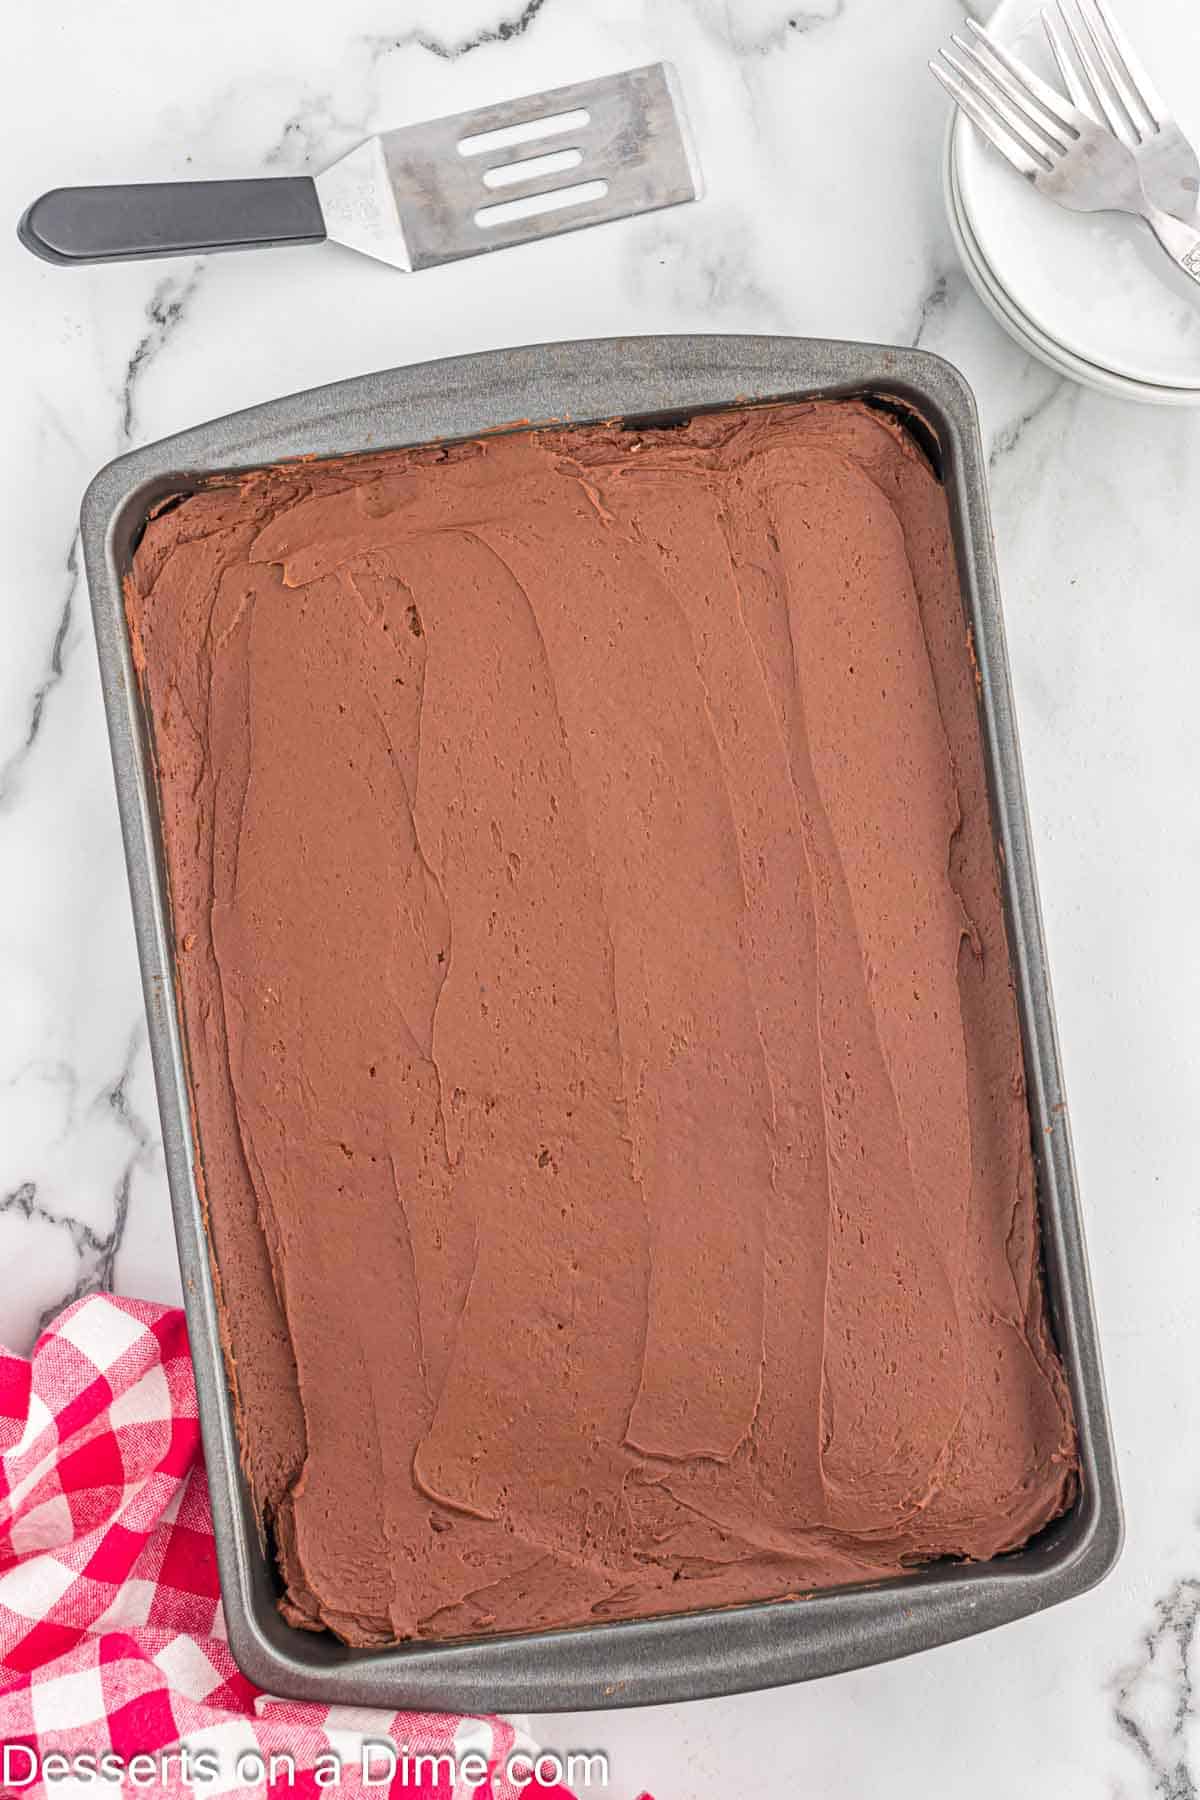 Frosted cake in a baking pan